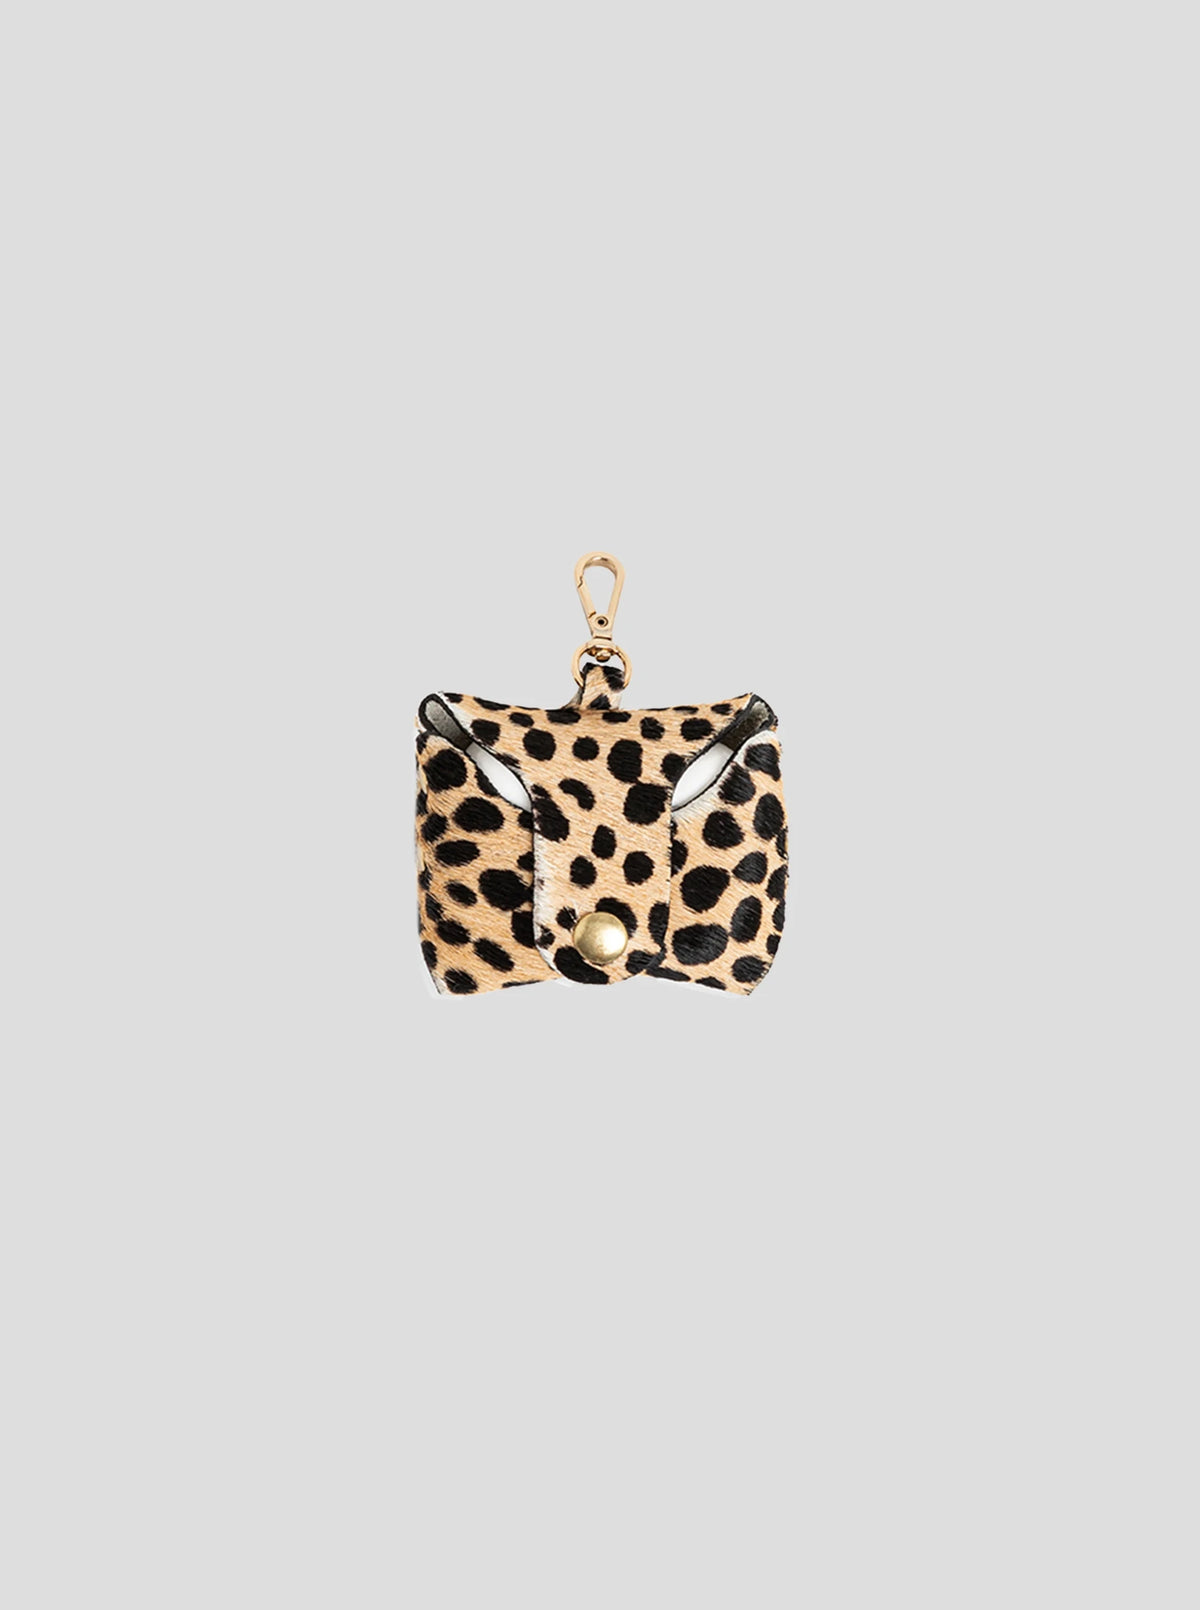 The Minis - Pro Airpods case in Cheetah printed leather